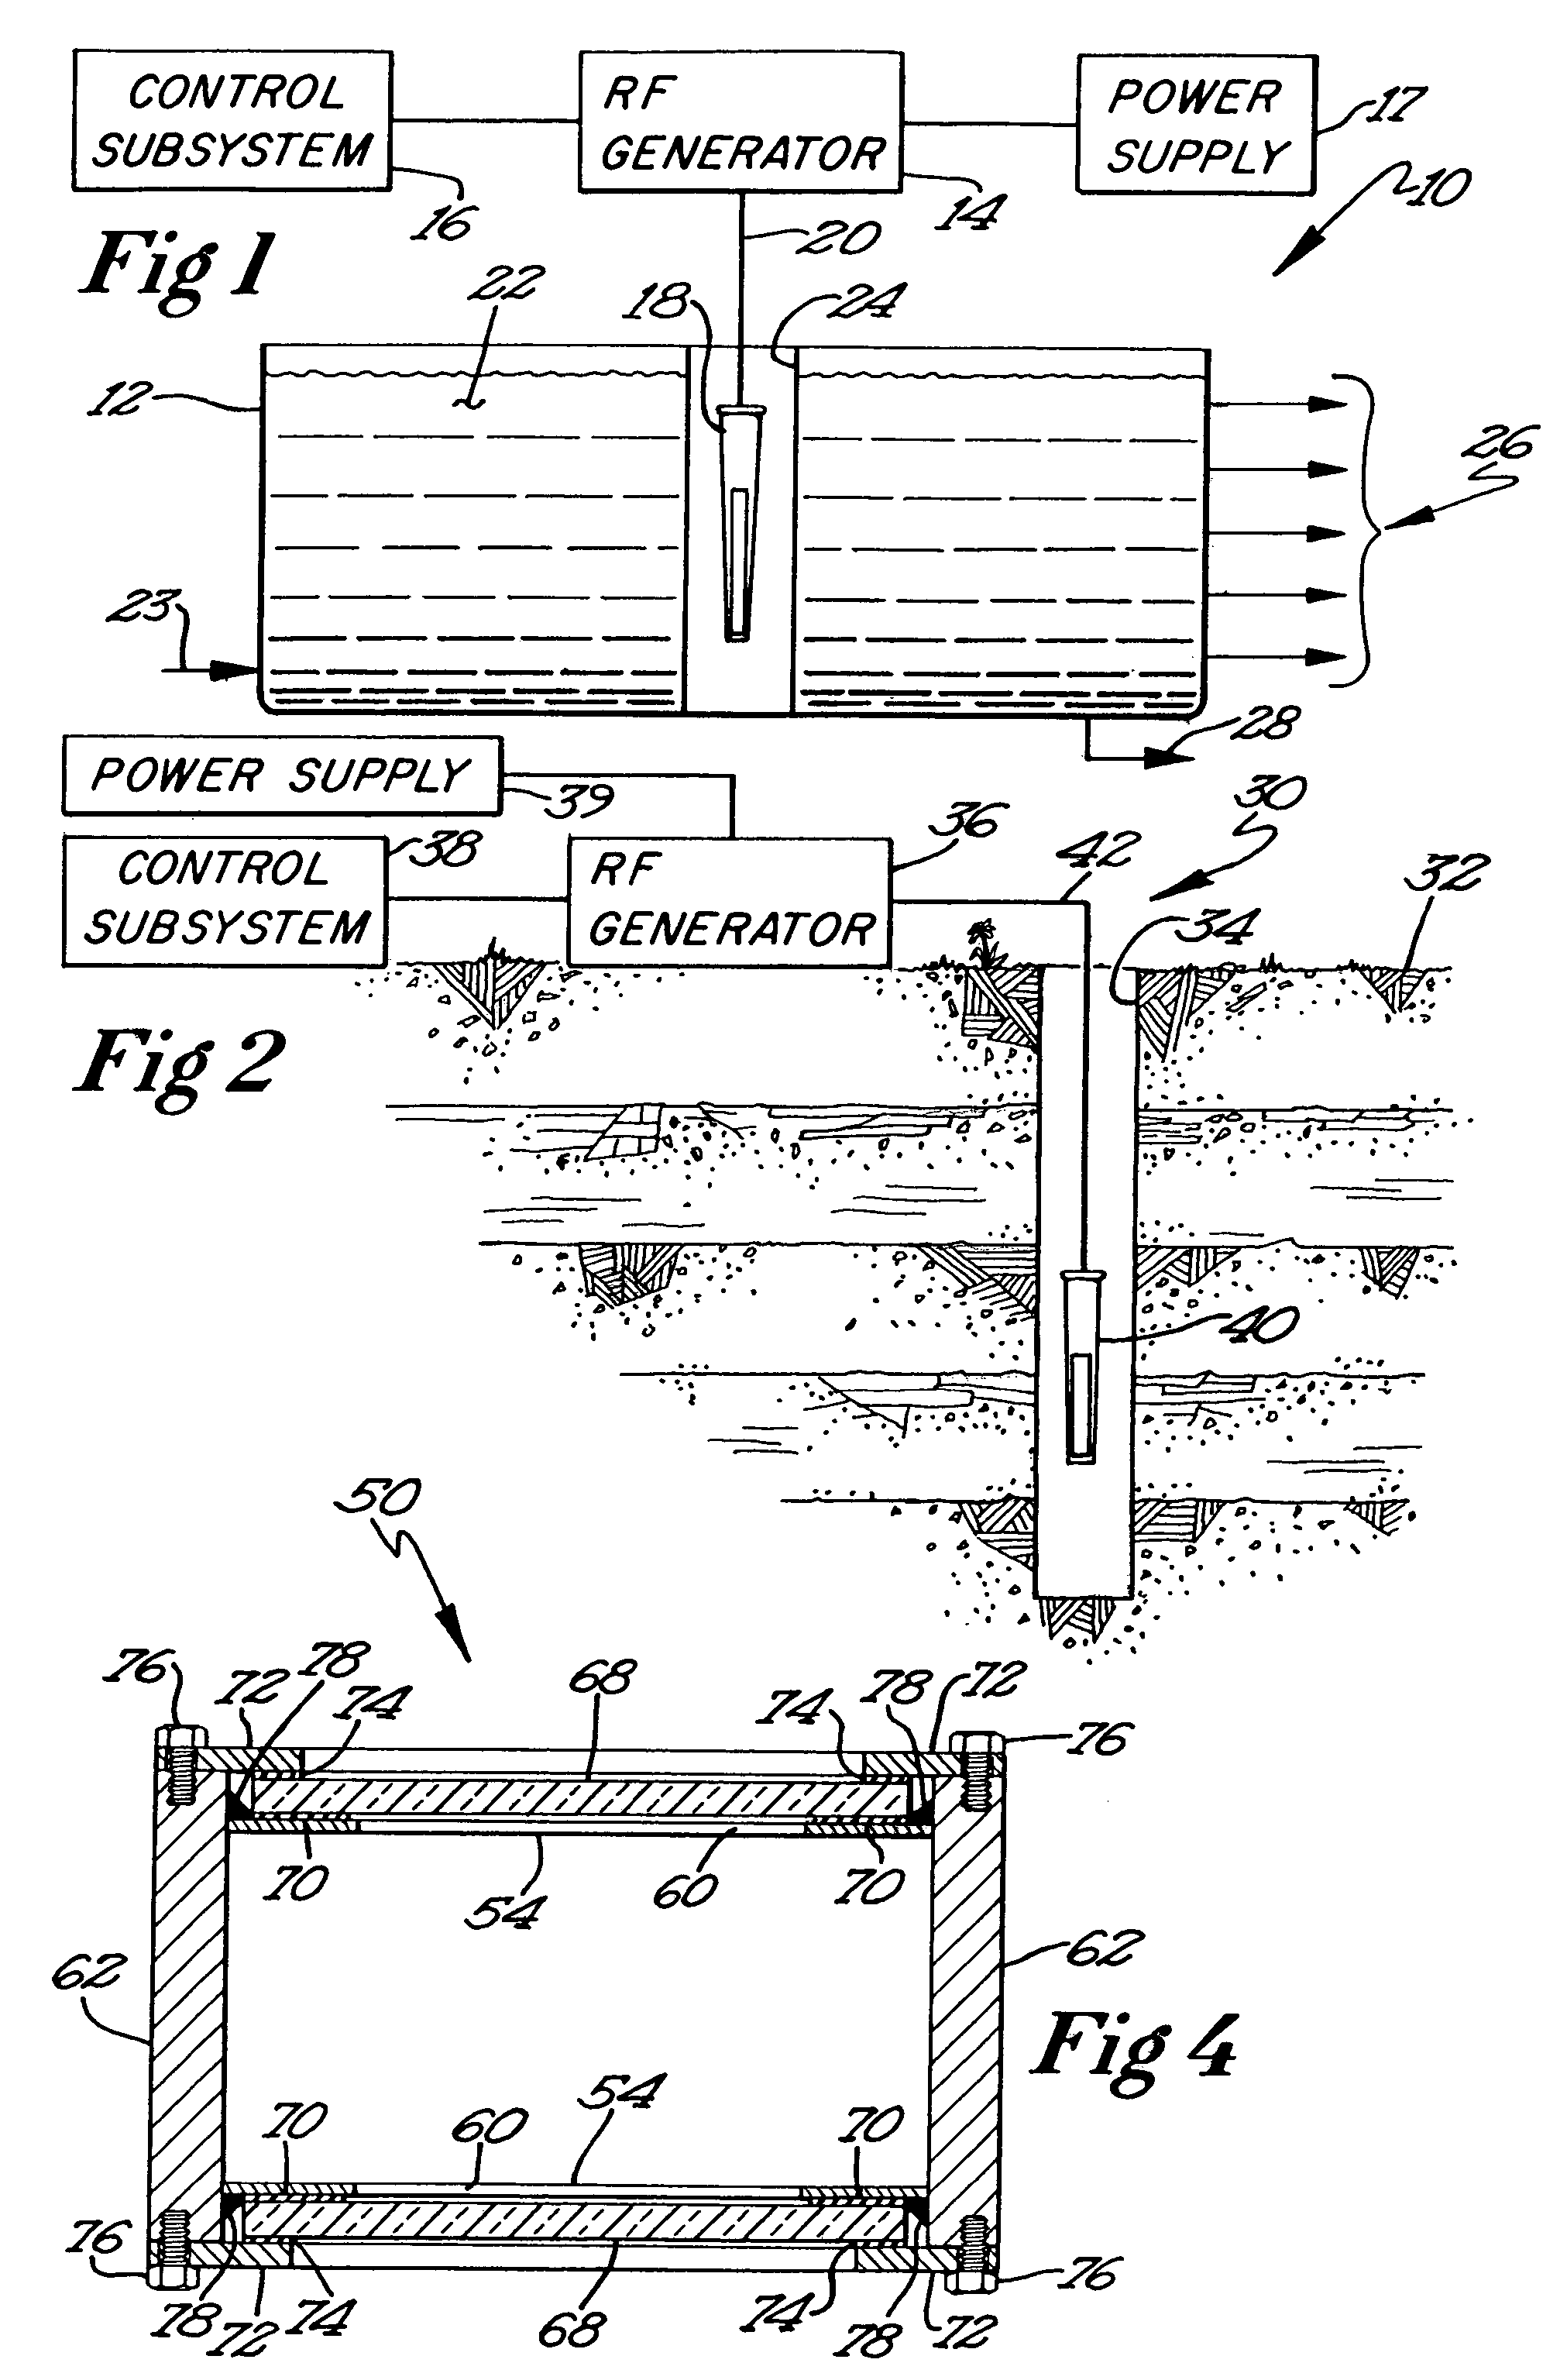 Microwave demulsification of hydrocarbon emulsion